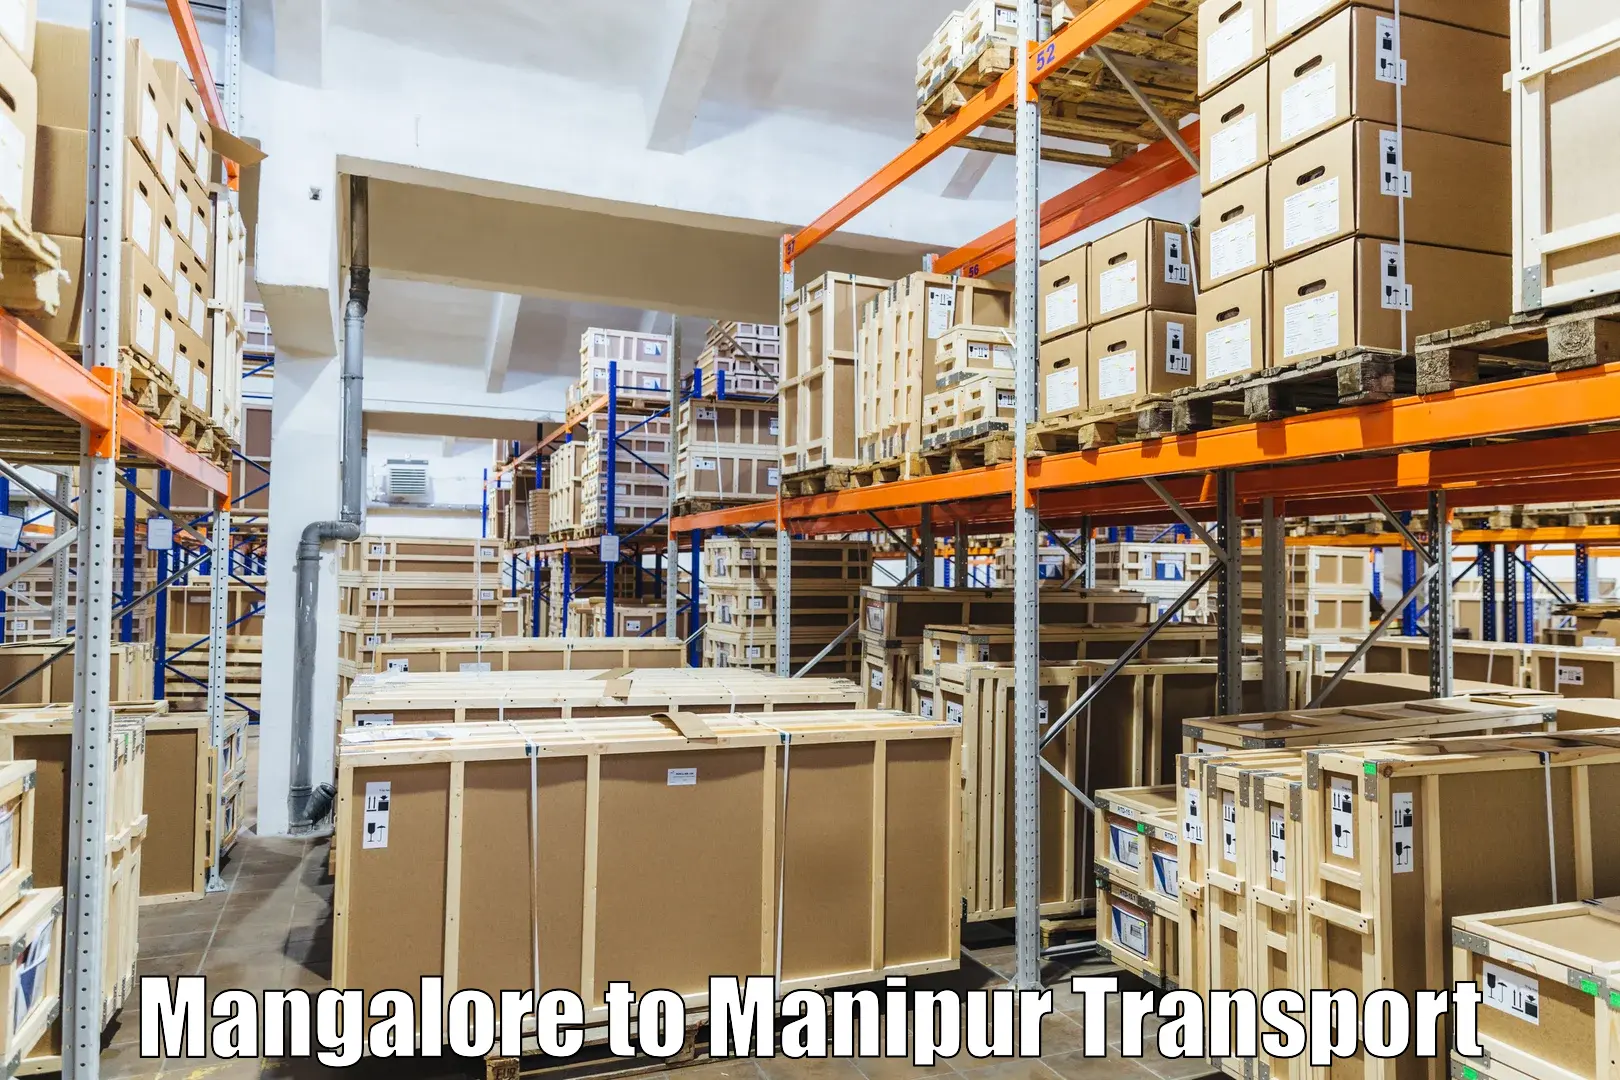 Delivery service Mangalore to Manipur